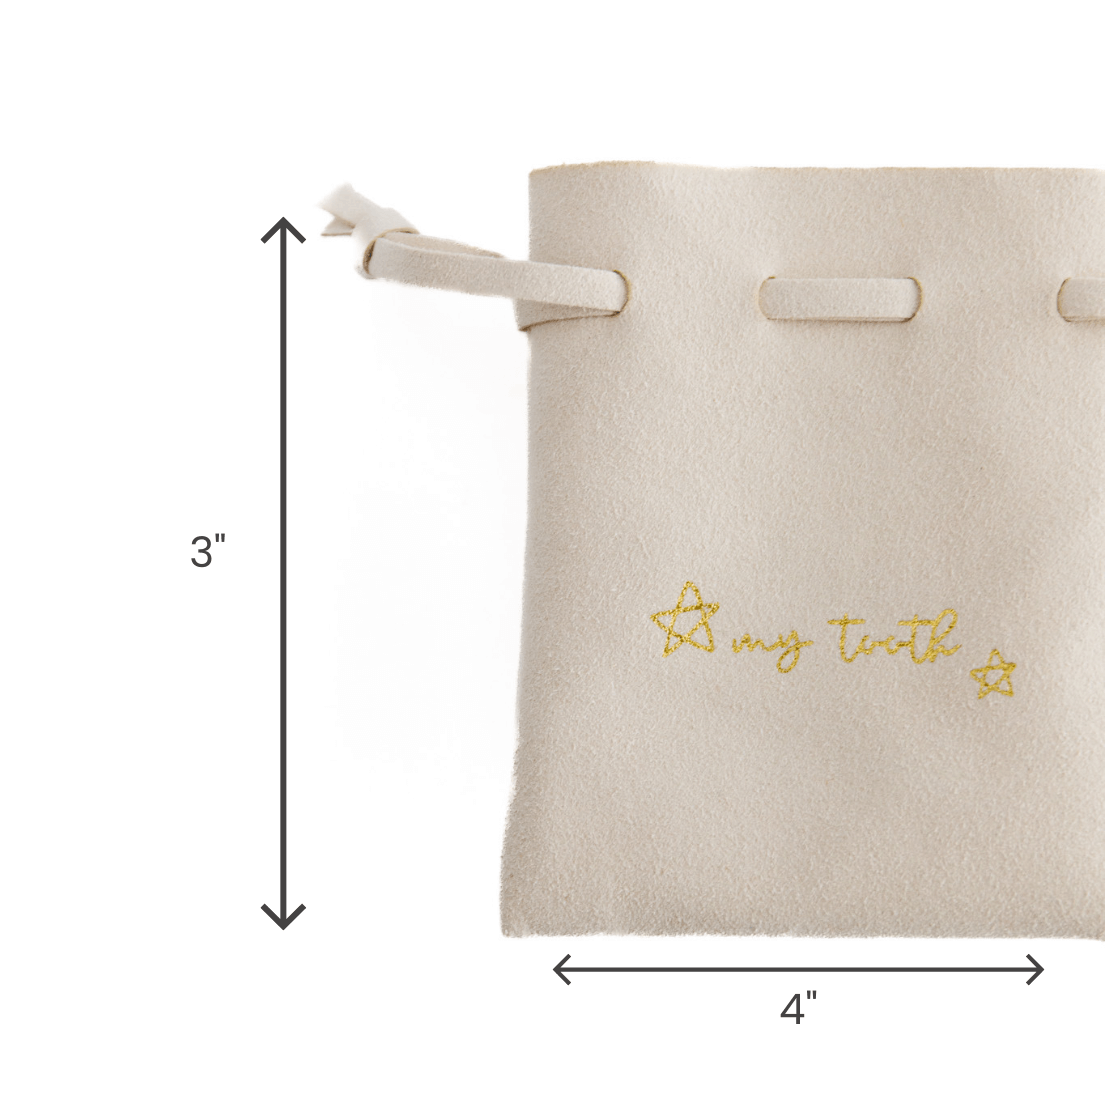 My Tooth Pouch for Tooth Fairy from Madly Wish